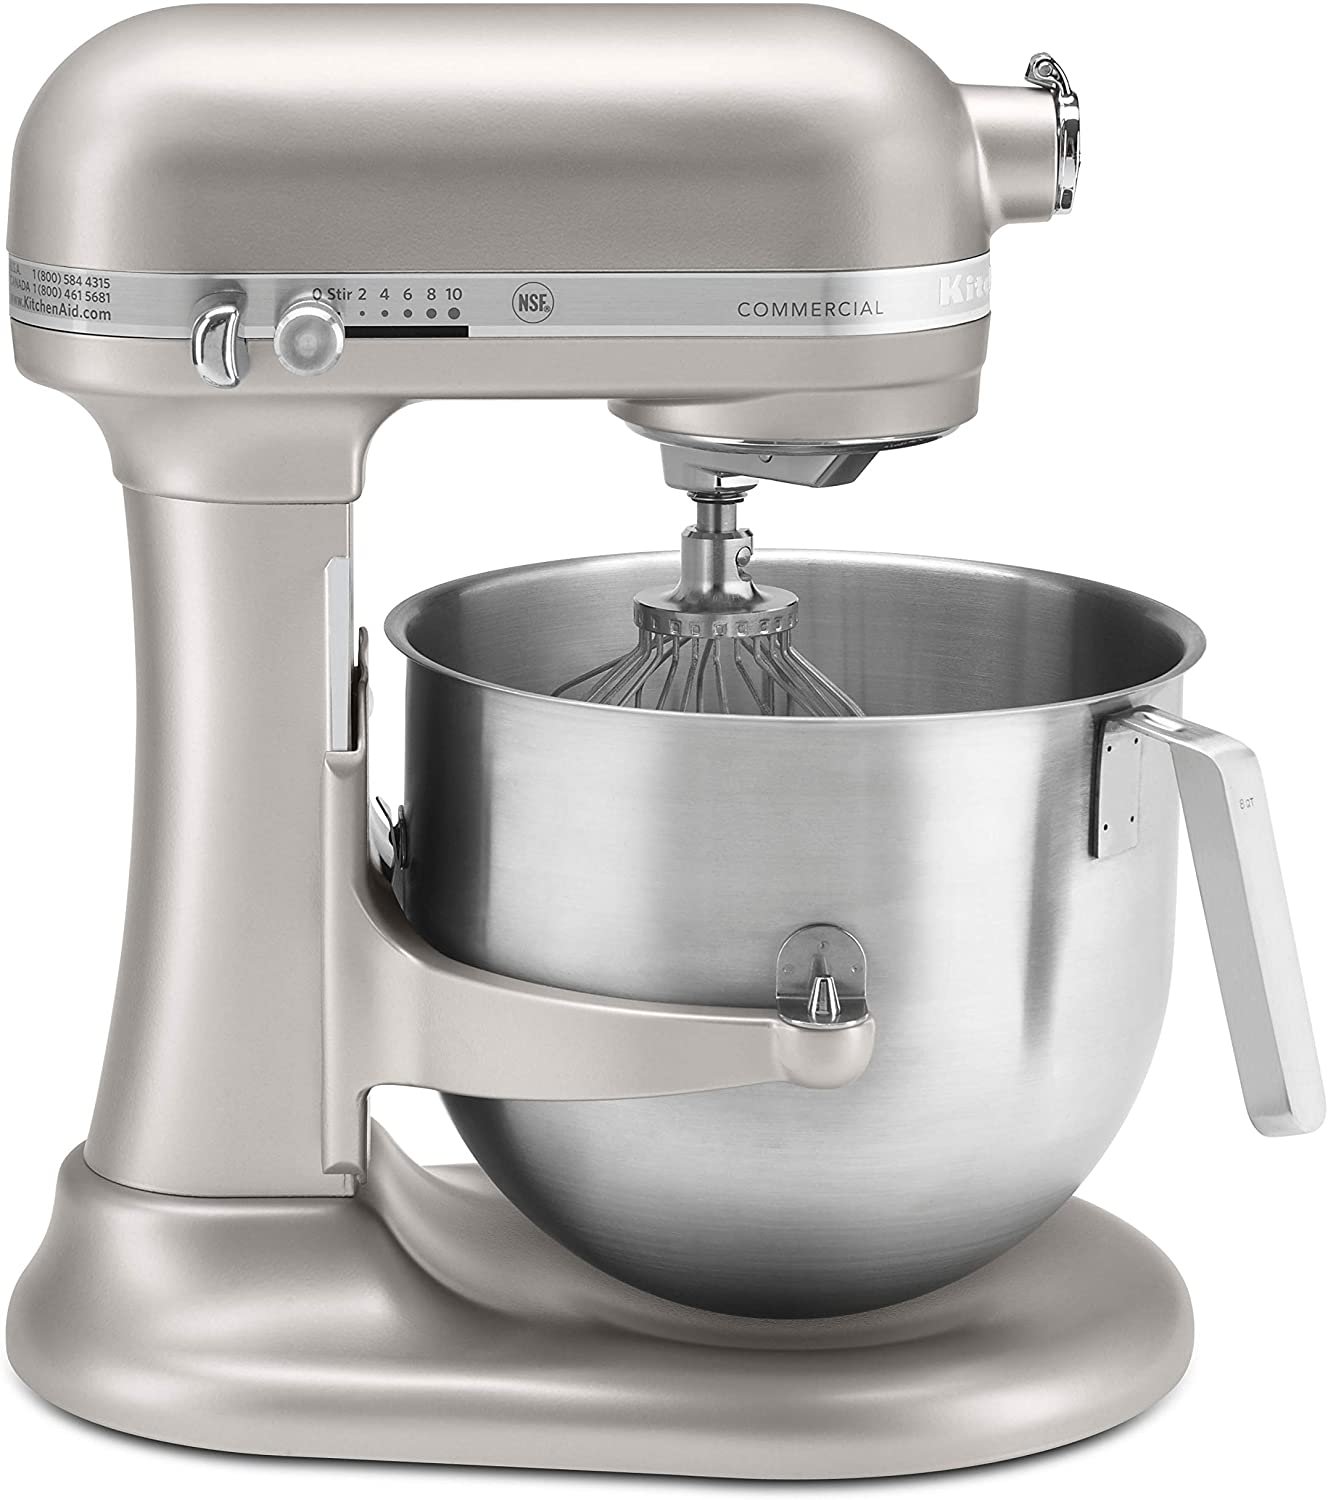 KitchenAid NSF Certified Commercial Series 8 Quart Bowl Lift Stand Mixer, - image 3 of 8